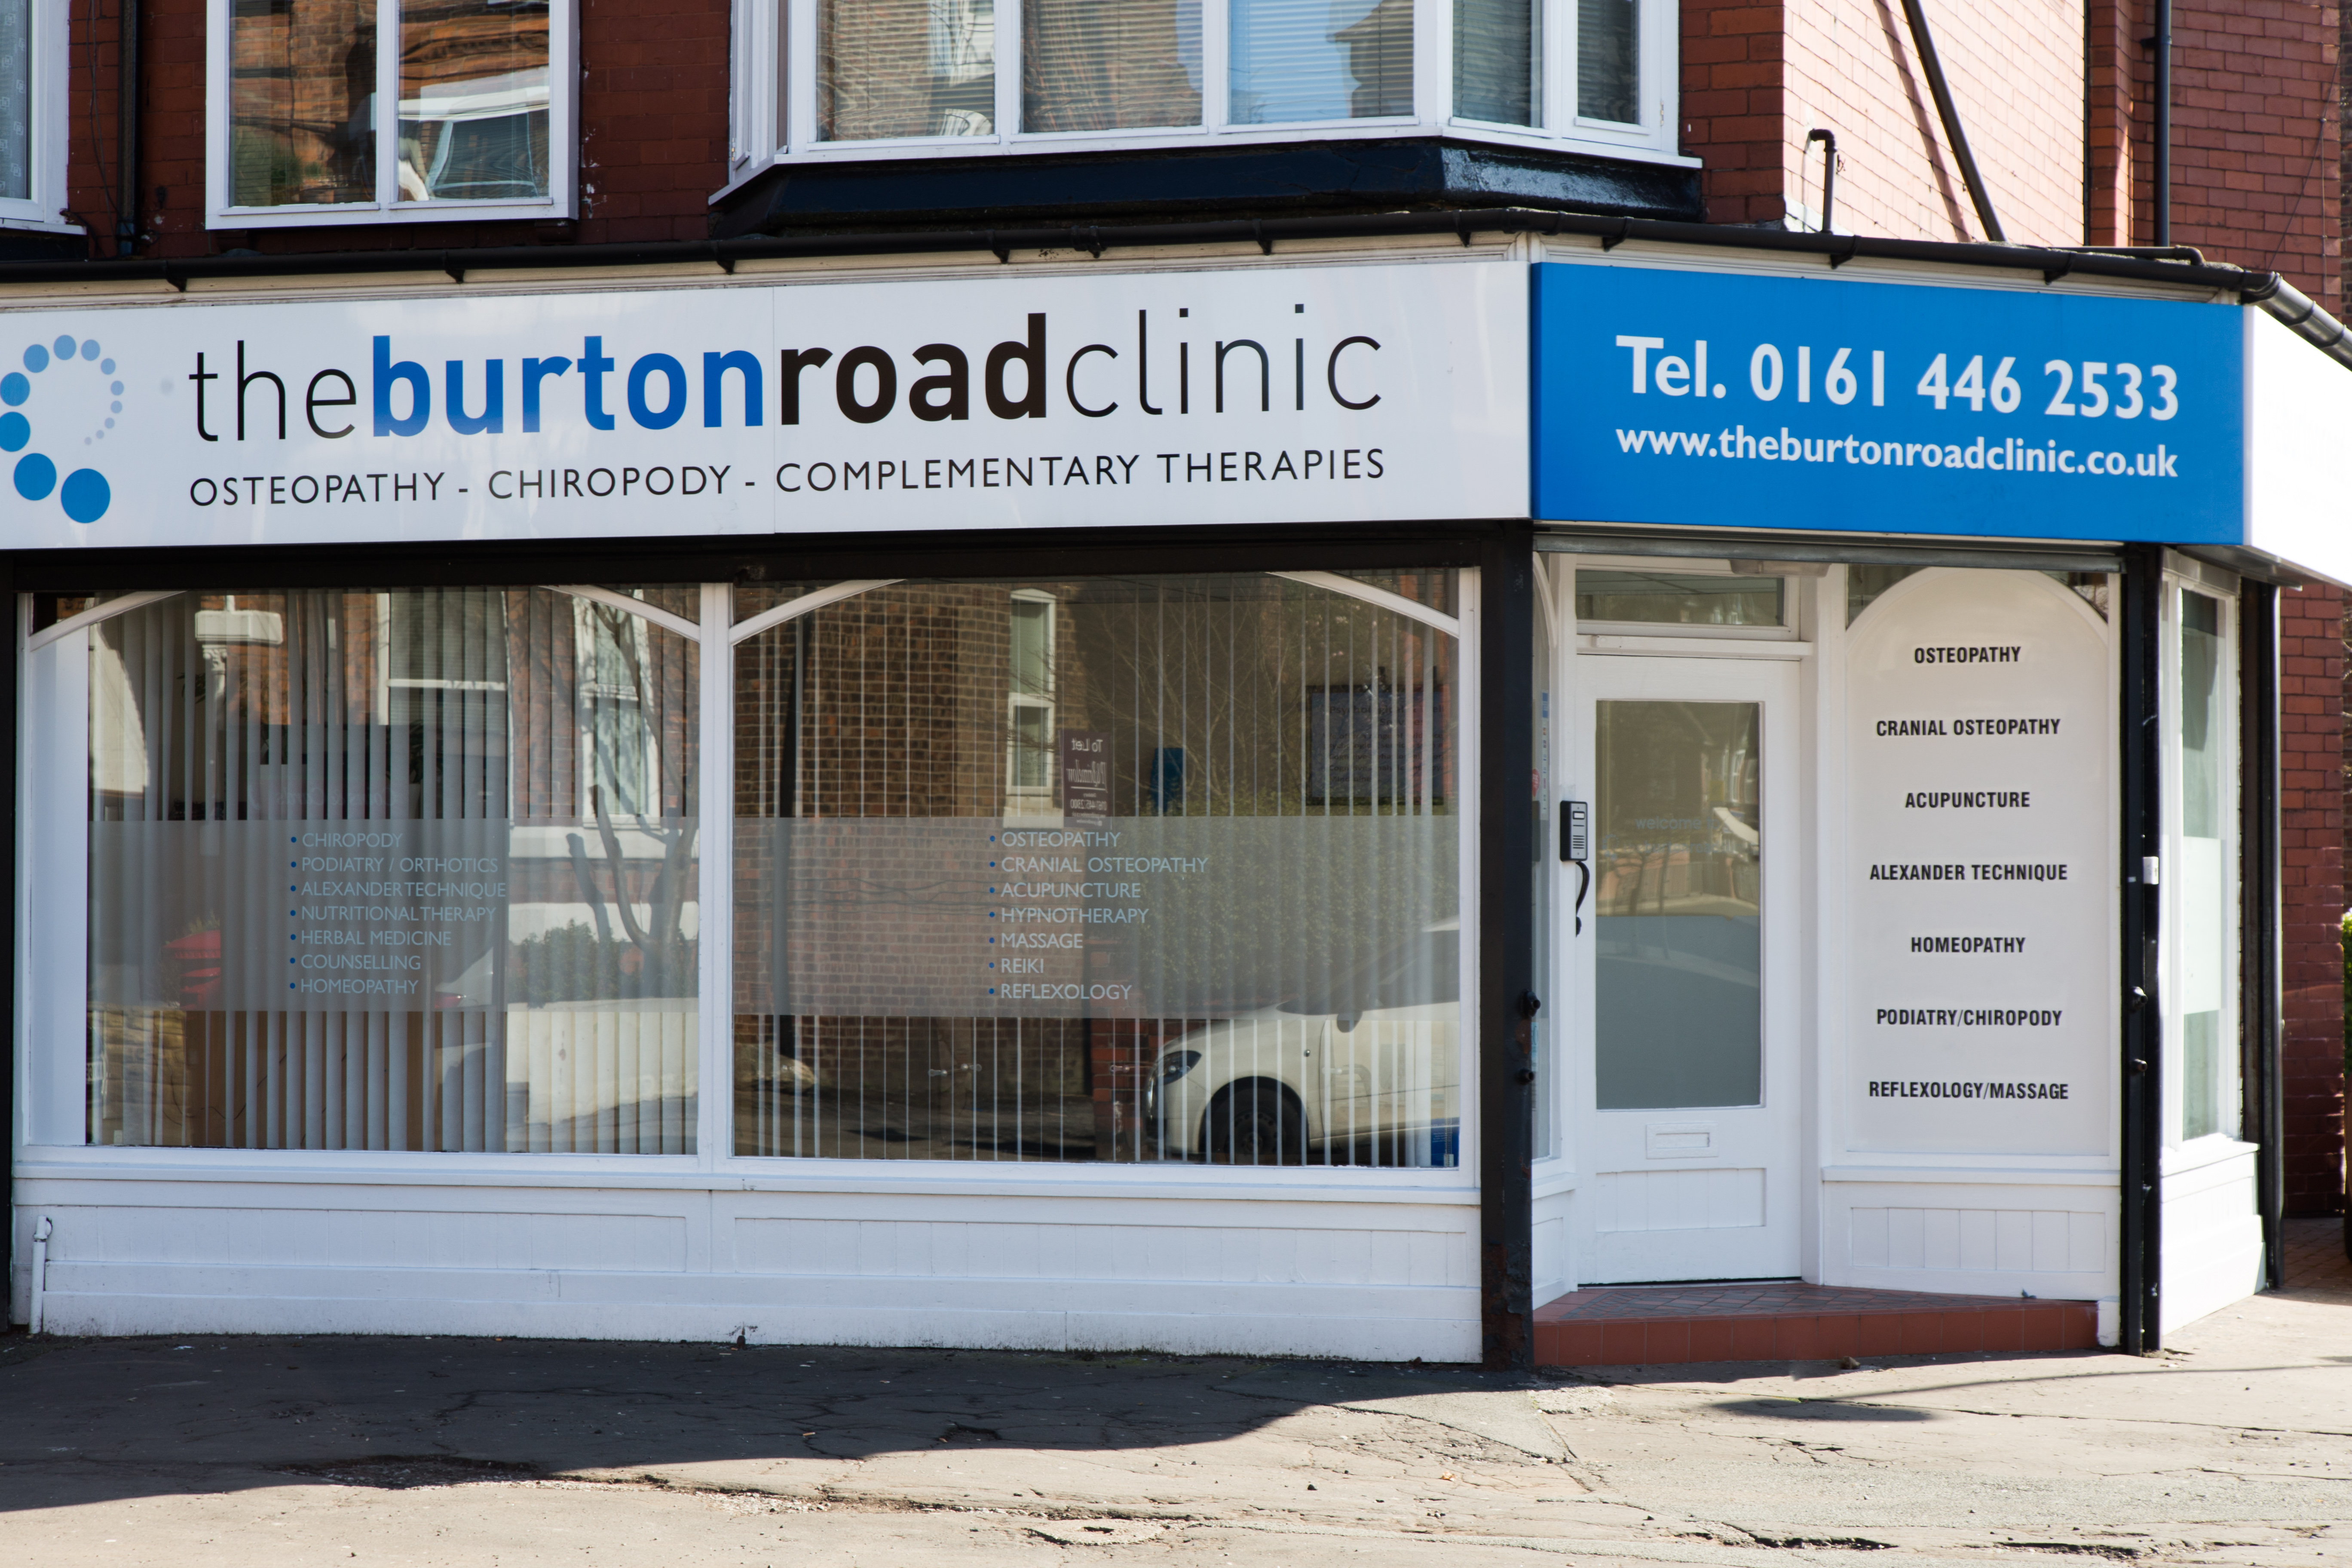 An image of the front of our clinic.